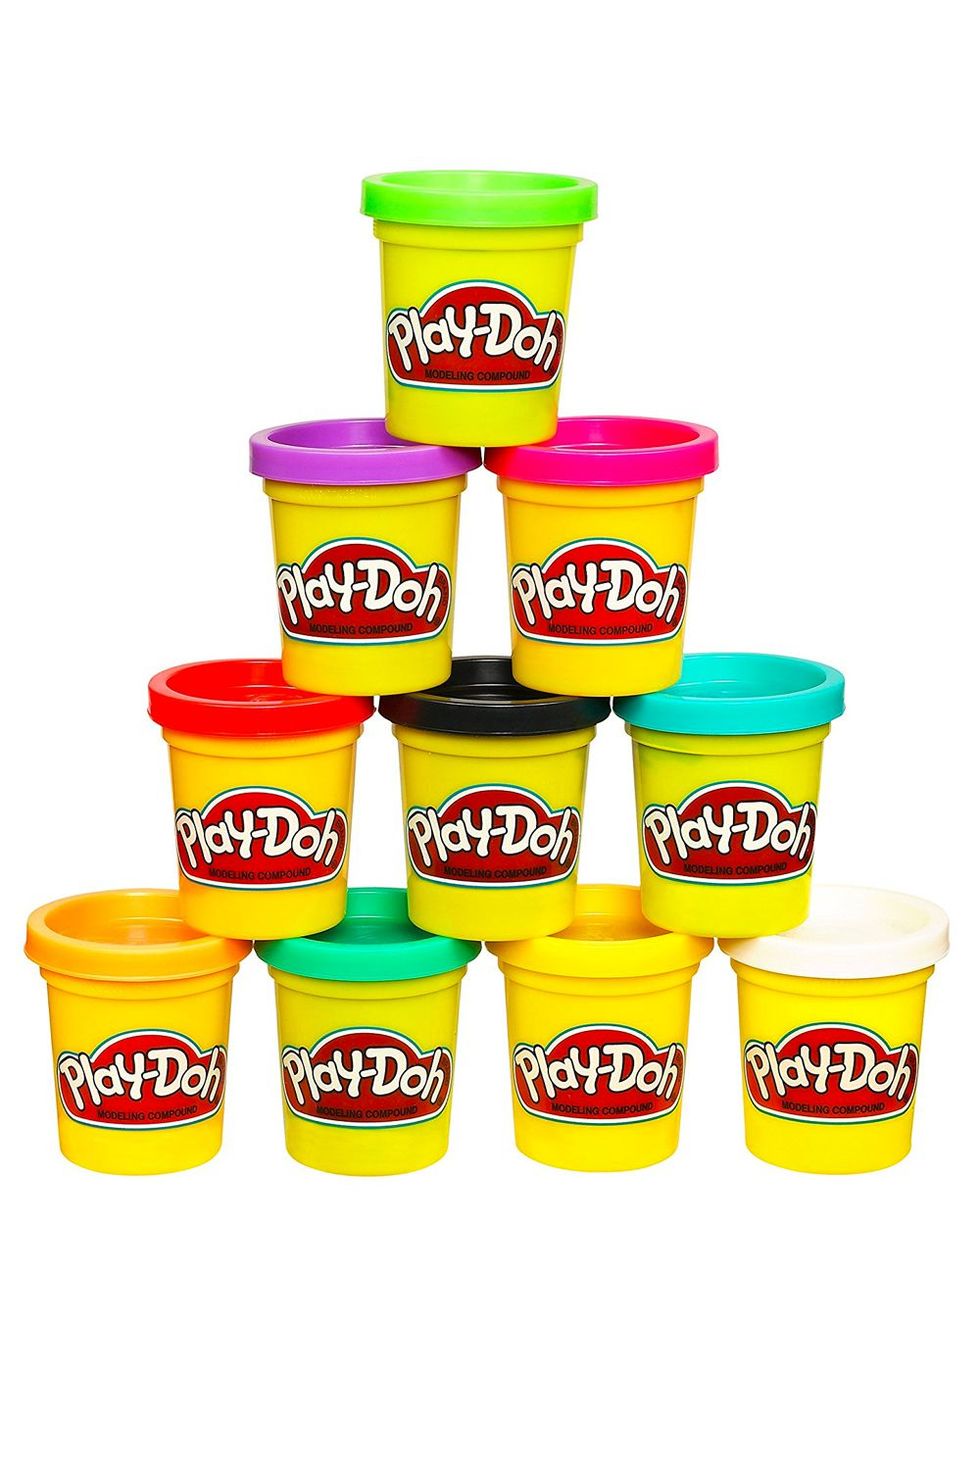 15 Fun Facts You Never Knew About Play-Doh - Everything You Need